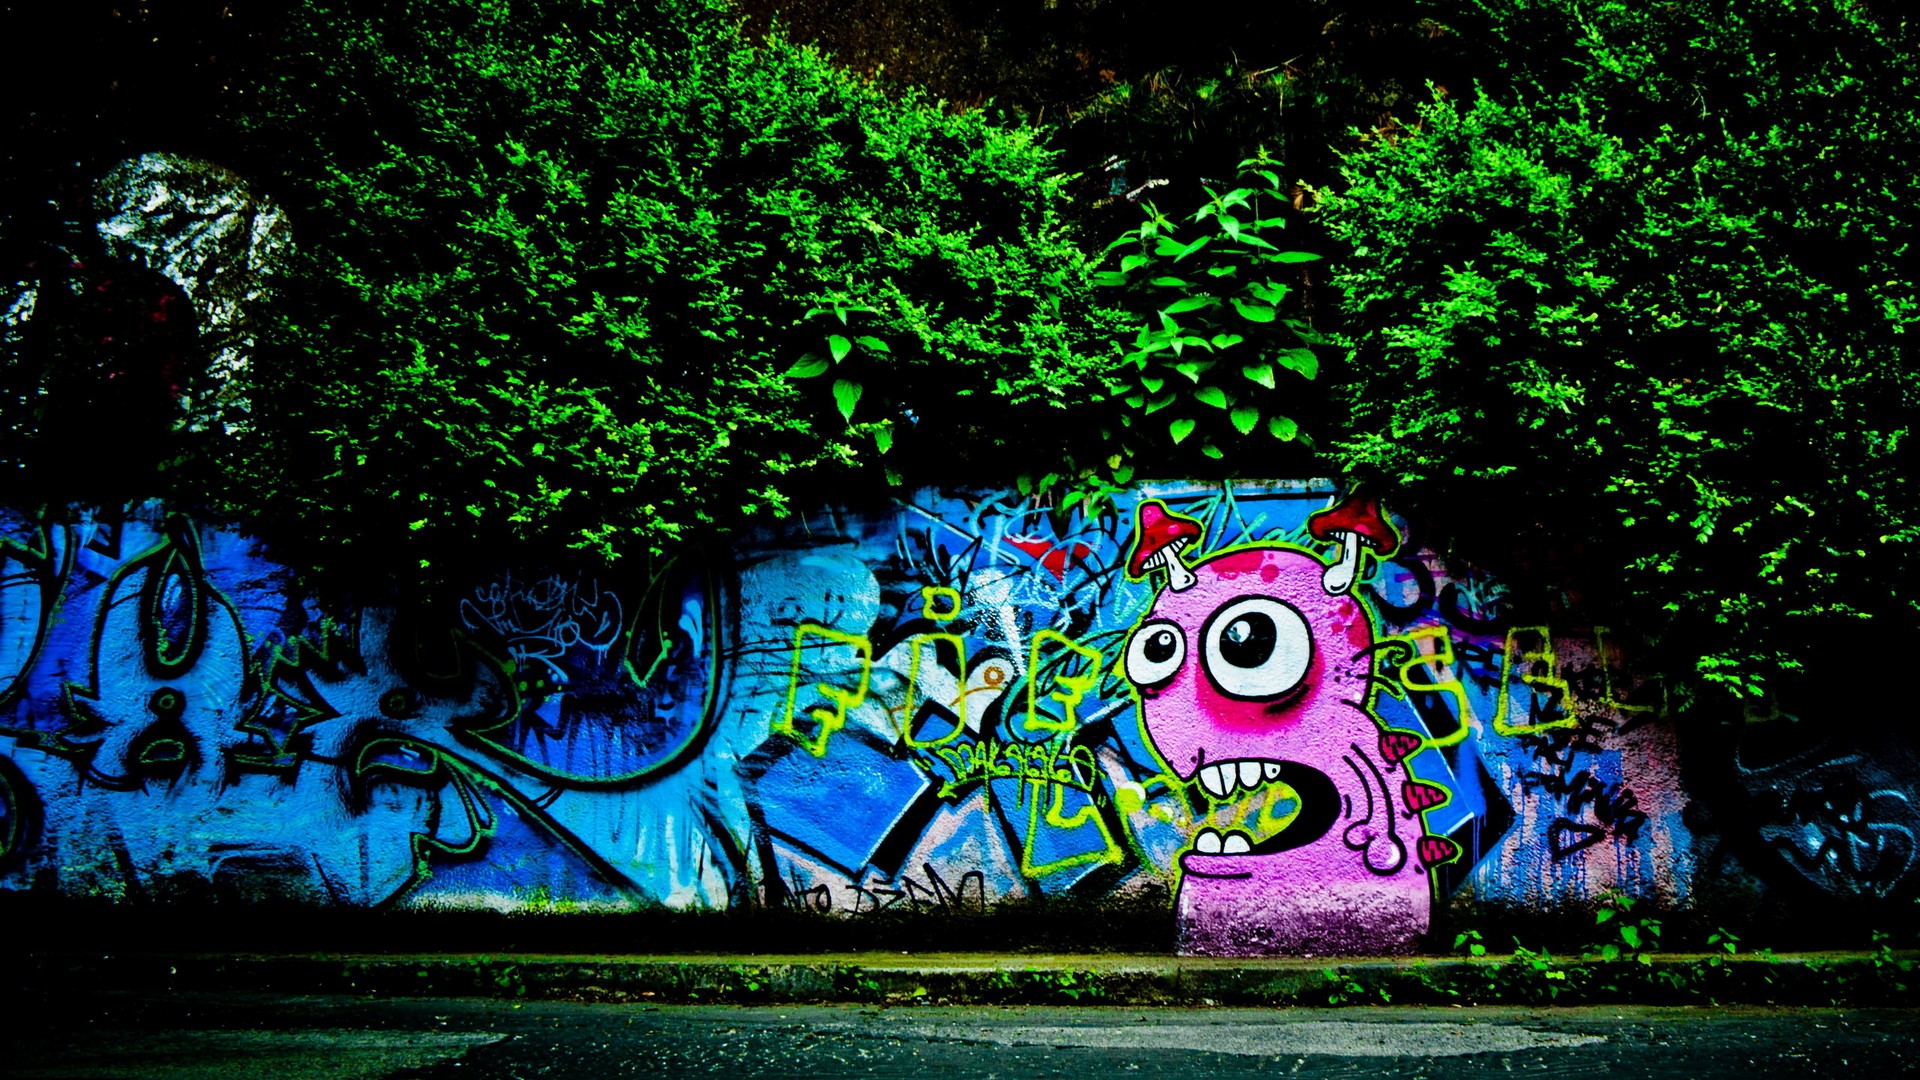 Best Graffiti Tag Wallpaper HD With Resolution 1920X1080 pixel. You can make this wallpaper for your Desktop Computer Backgrounds, Mac Wallpapers, Android Lock screen or iPhone Screensavers